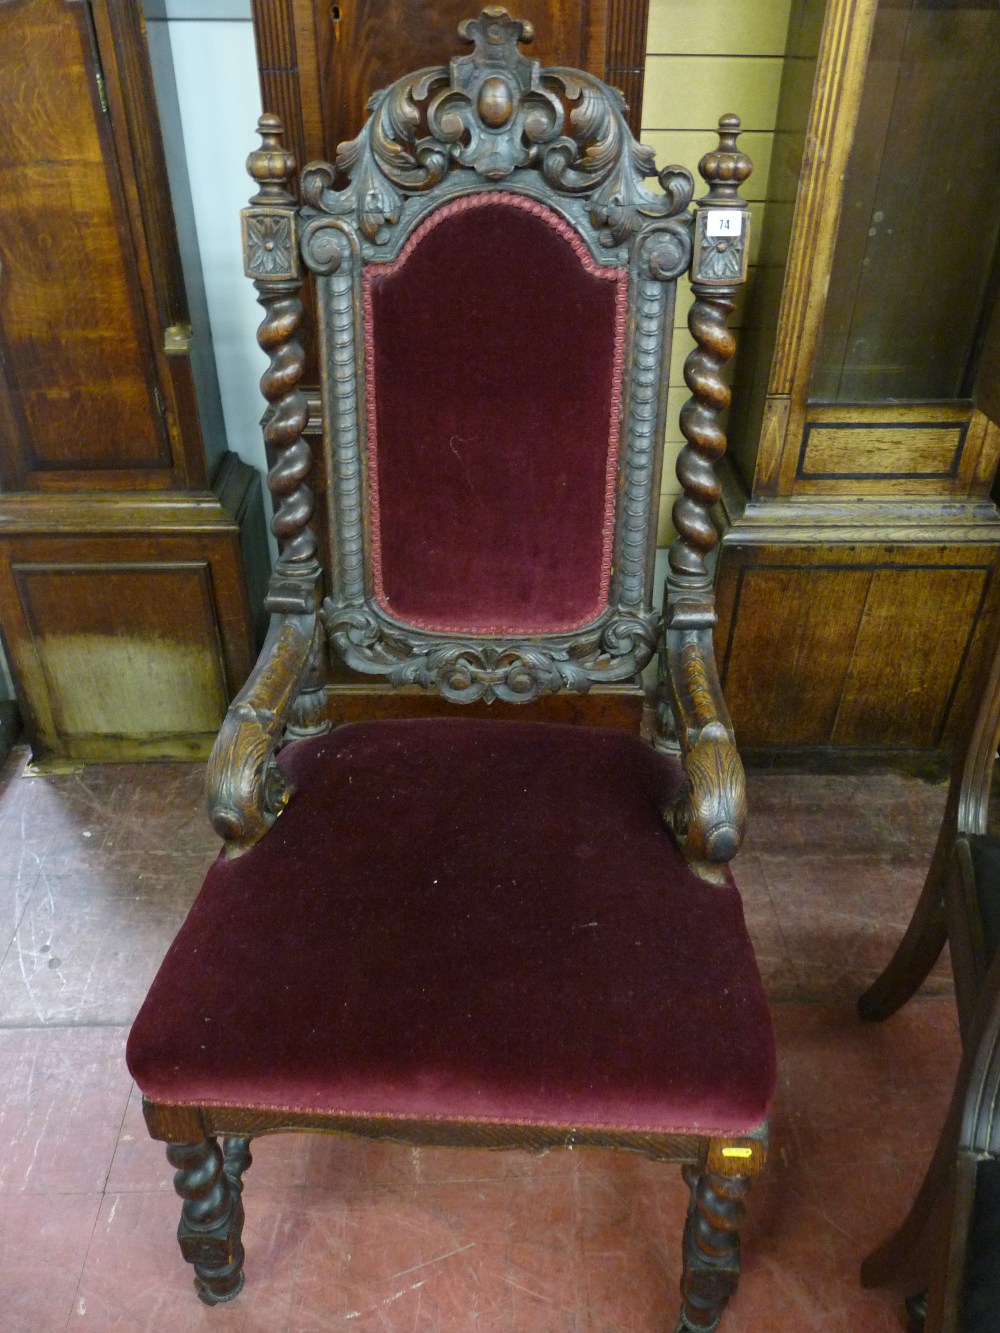 A 19th CENTURY JACOBEAN STYLE ARMCHAIR, carved oak with leaf and cartouche top rail, barley twist